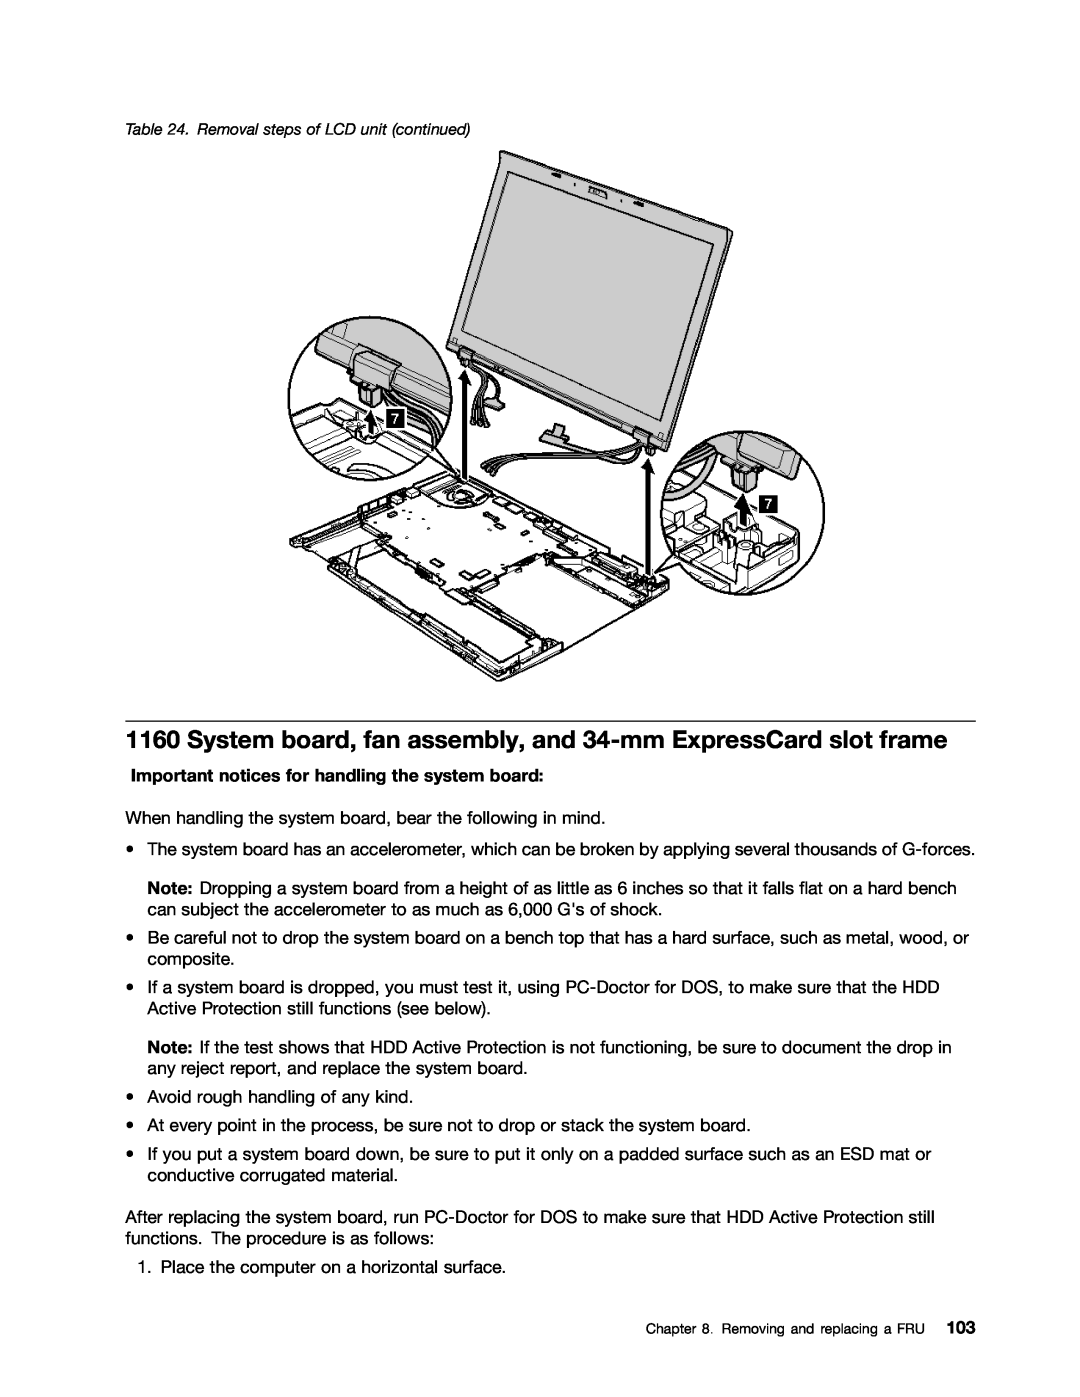 IBM T410S System board, fan assembly, and 34-mm ExpressCard slot frame, Important notices for handling the system board 